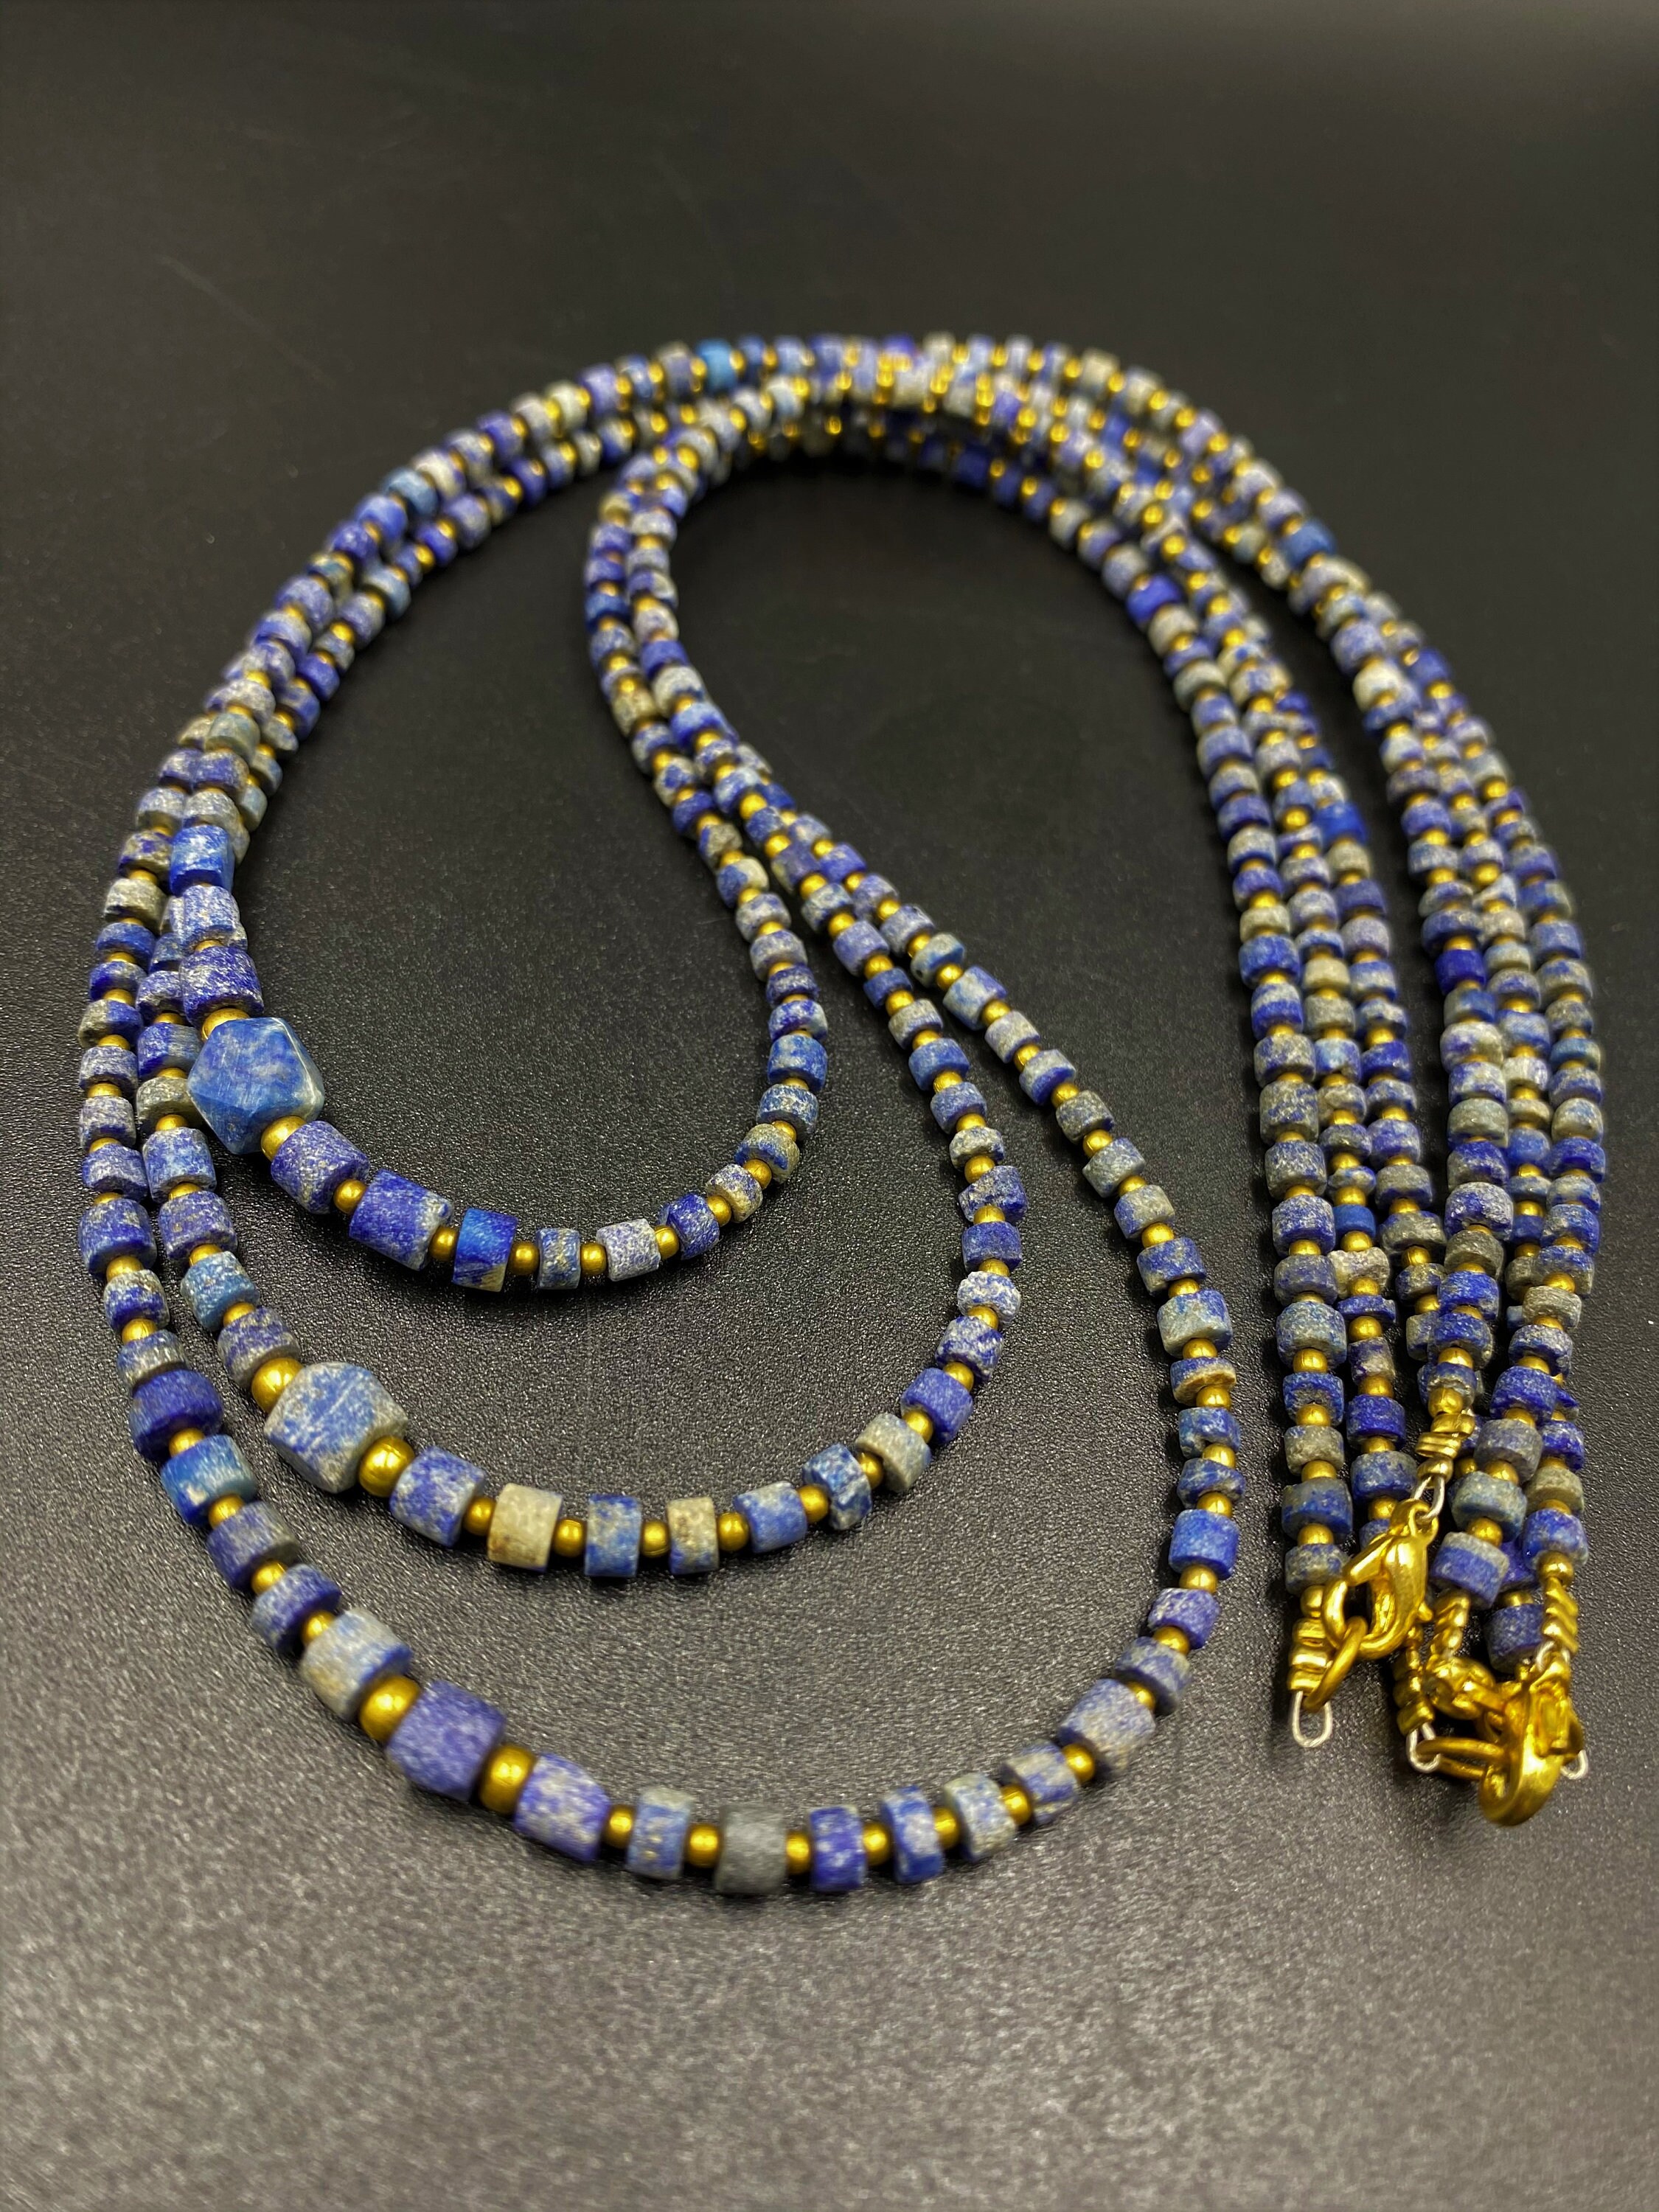 Lot of 3 String of Lapis Lazuli Ancient Beads From Afghanistan - Etsy